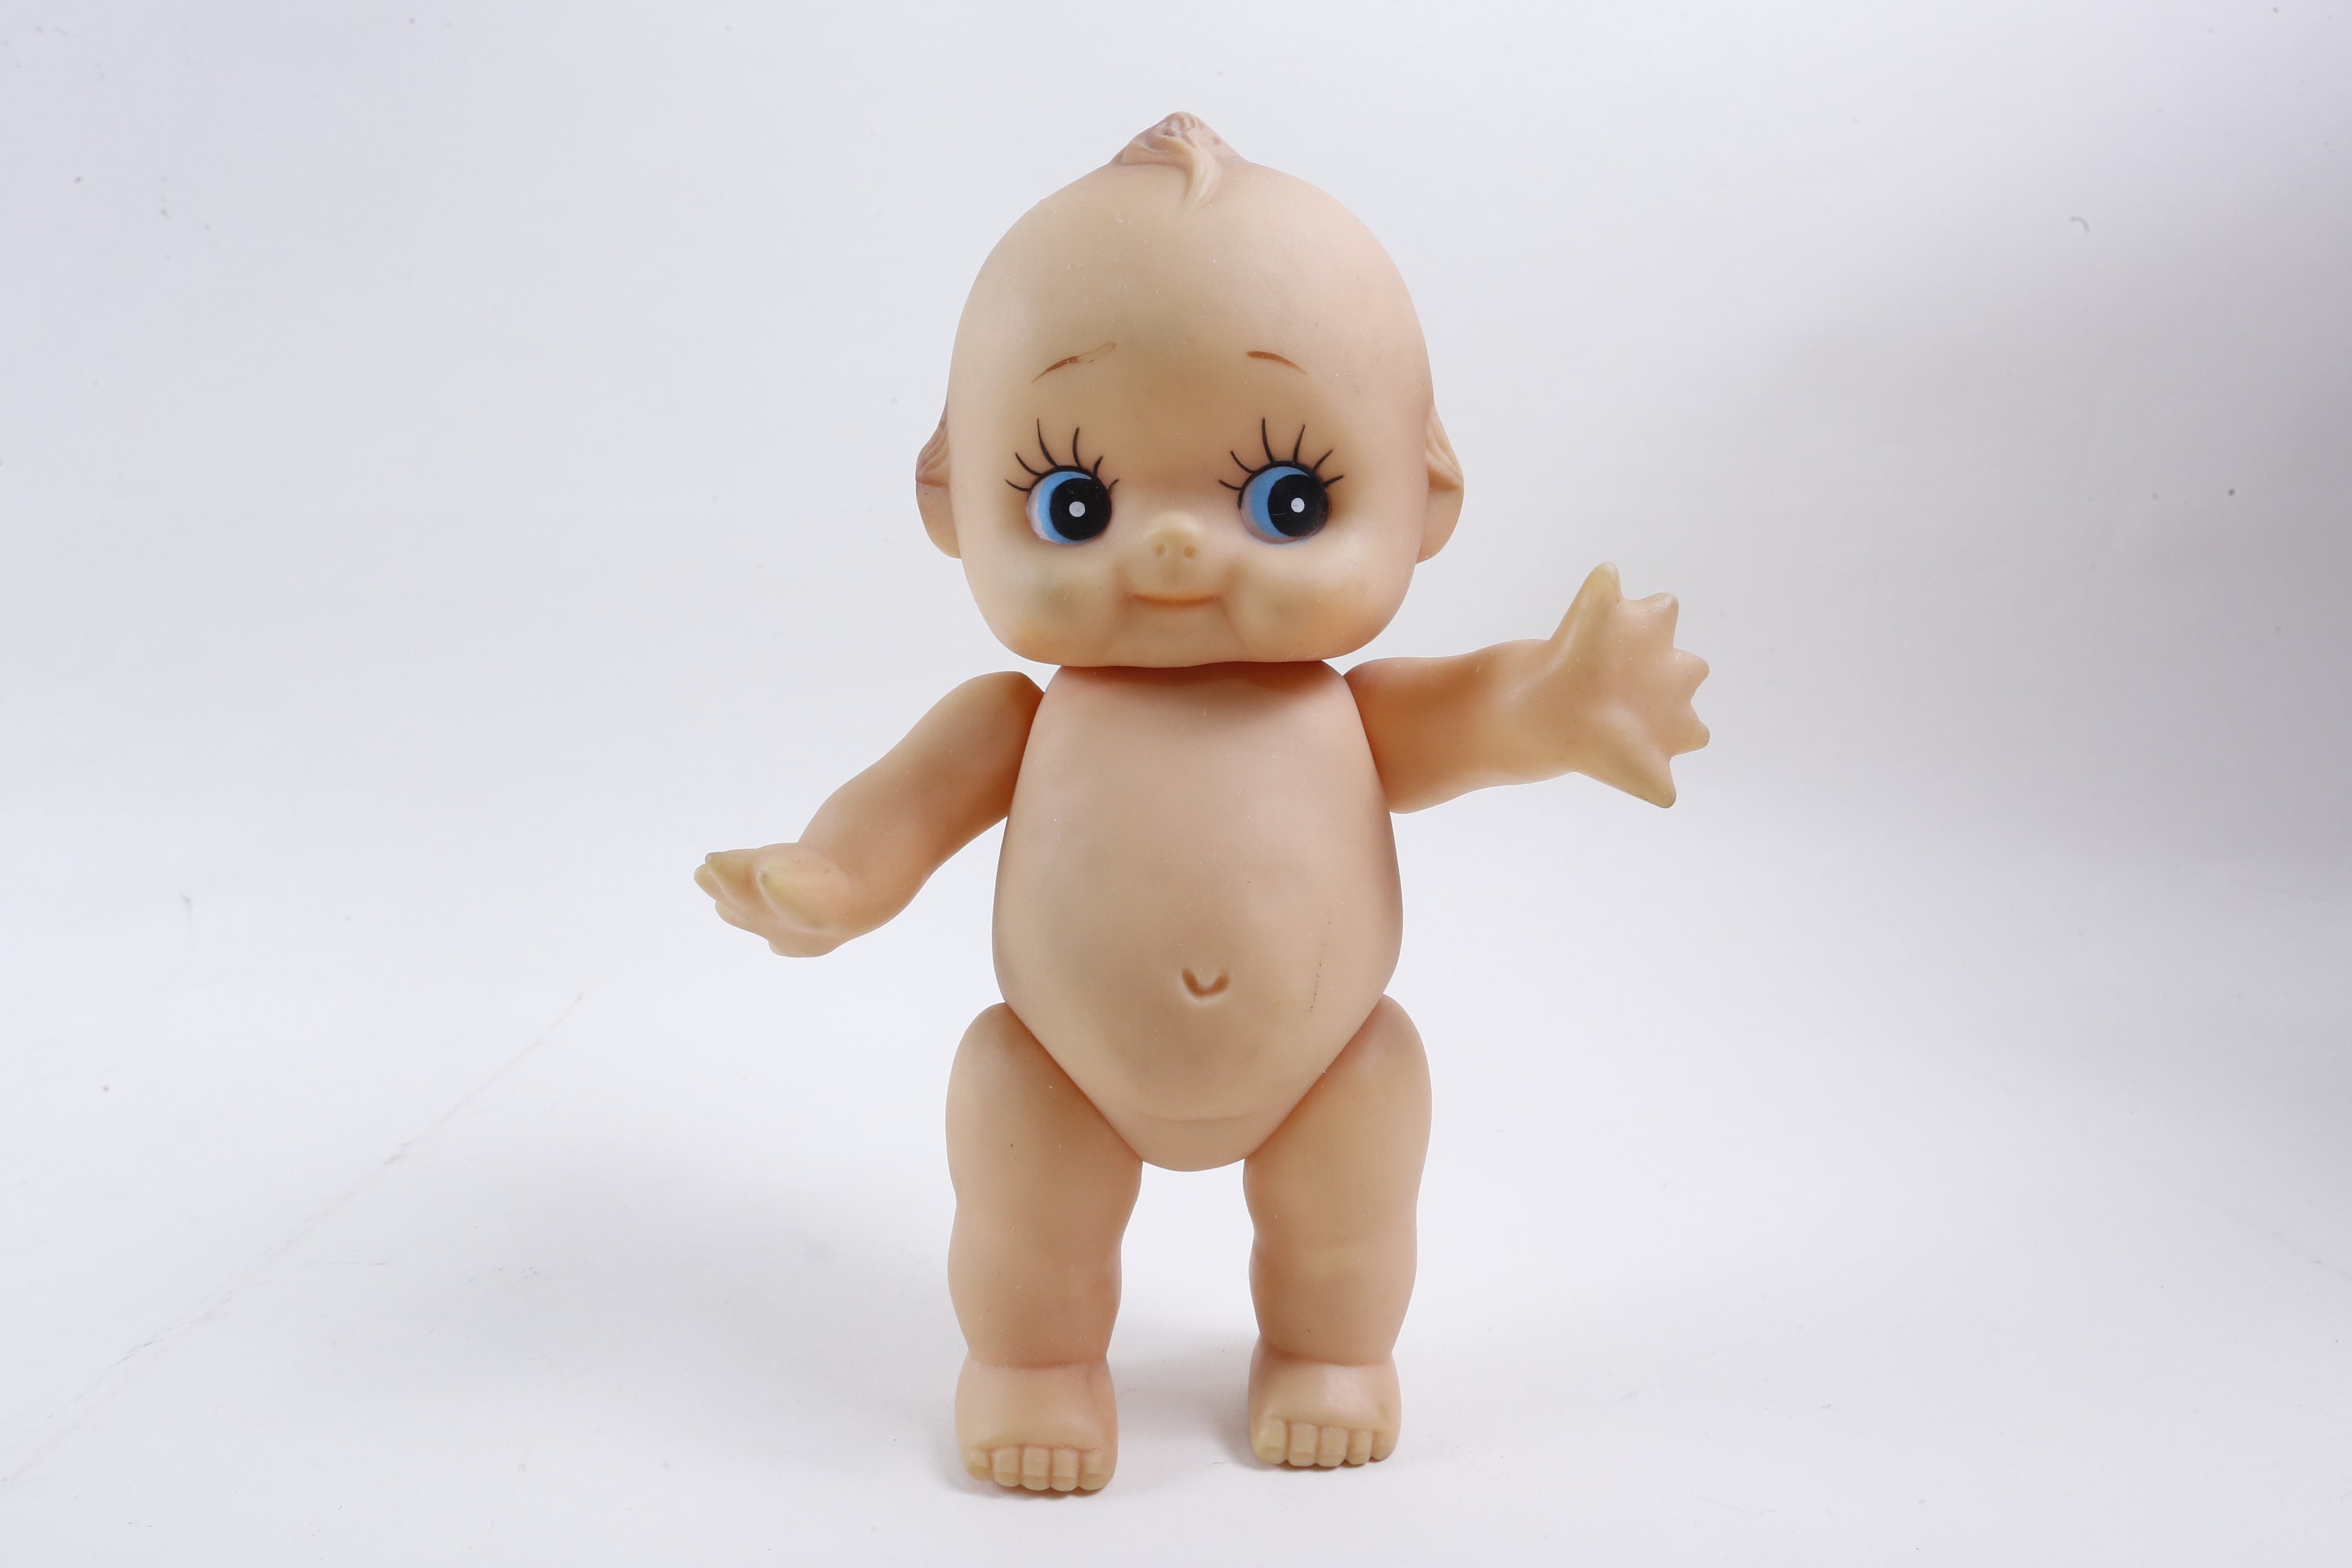 Adorable Kewpie Kitsch Baby Nude Doll Toy Blue Eyes Movable Limbs Plastic  Figure Children Vintage Collection ~ 170627